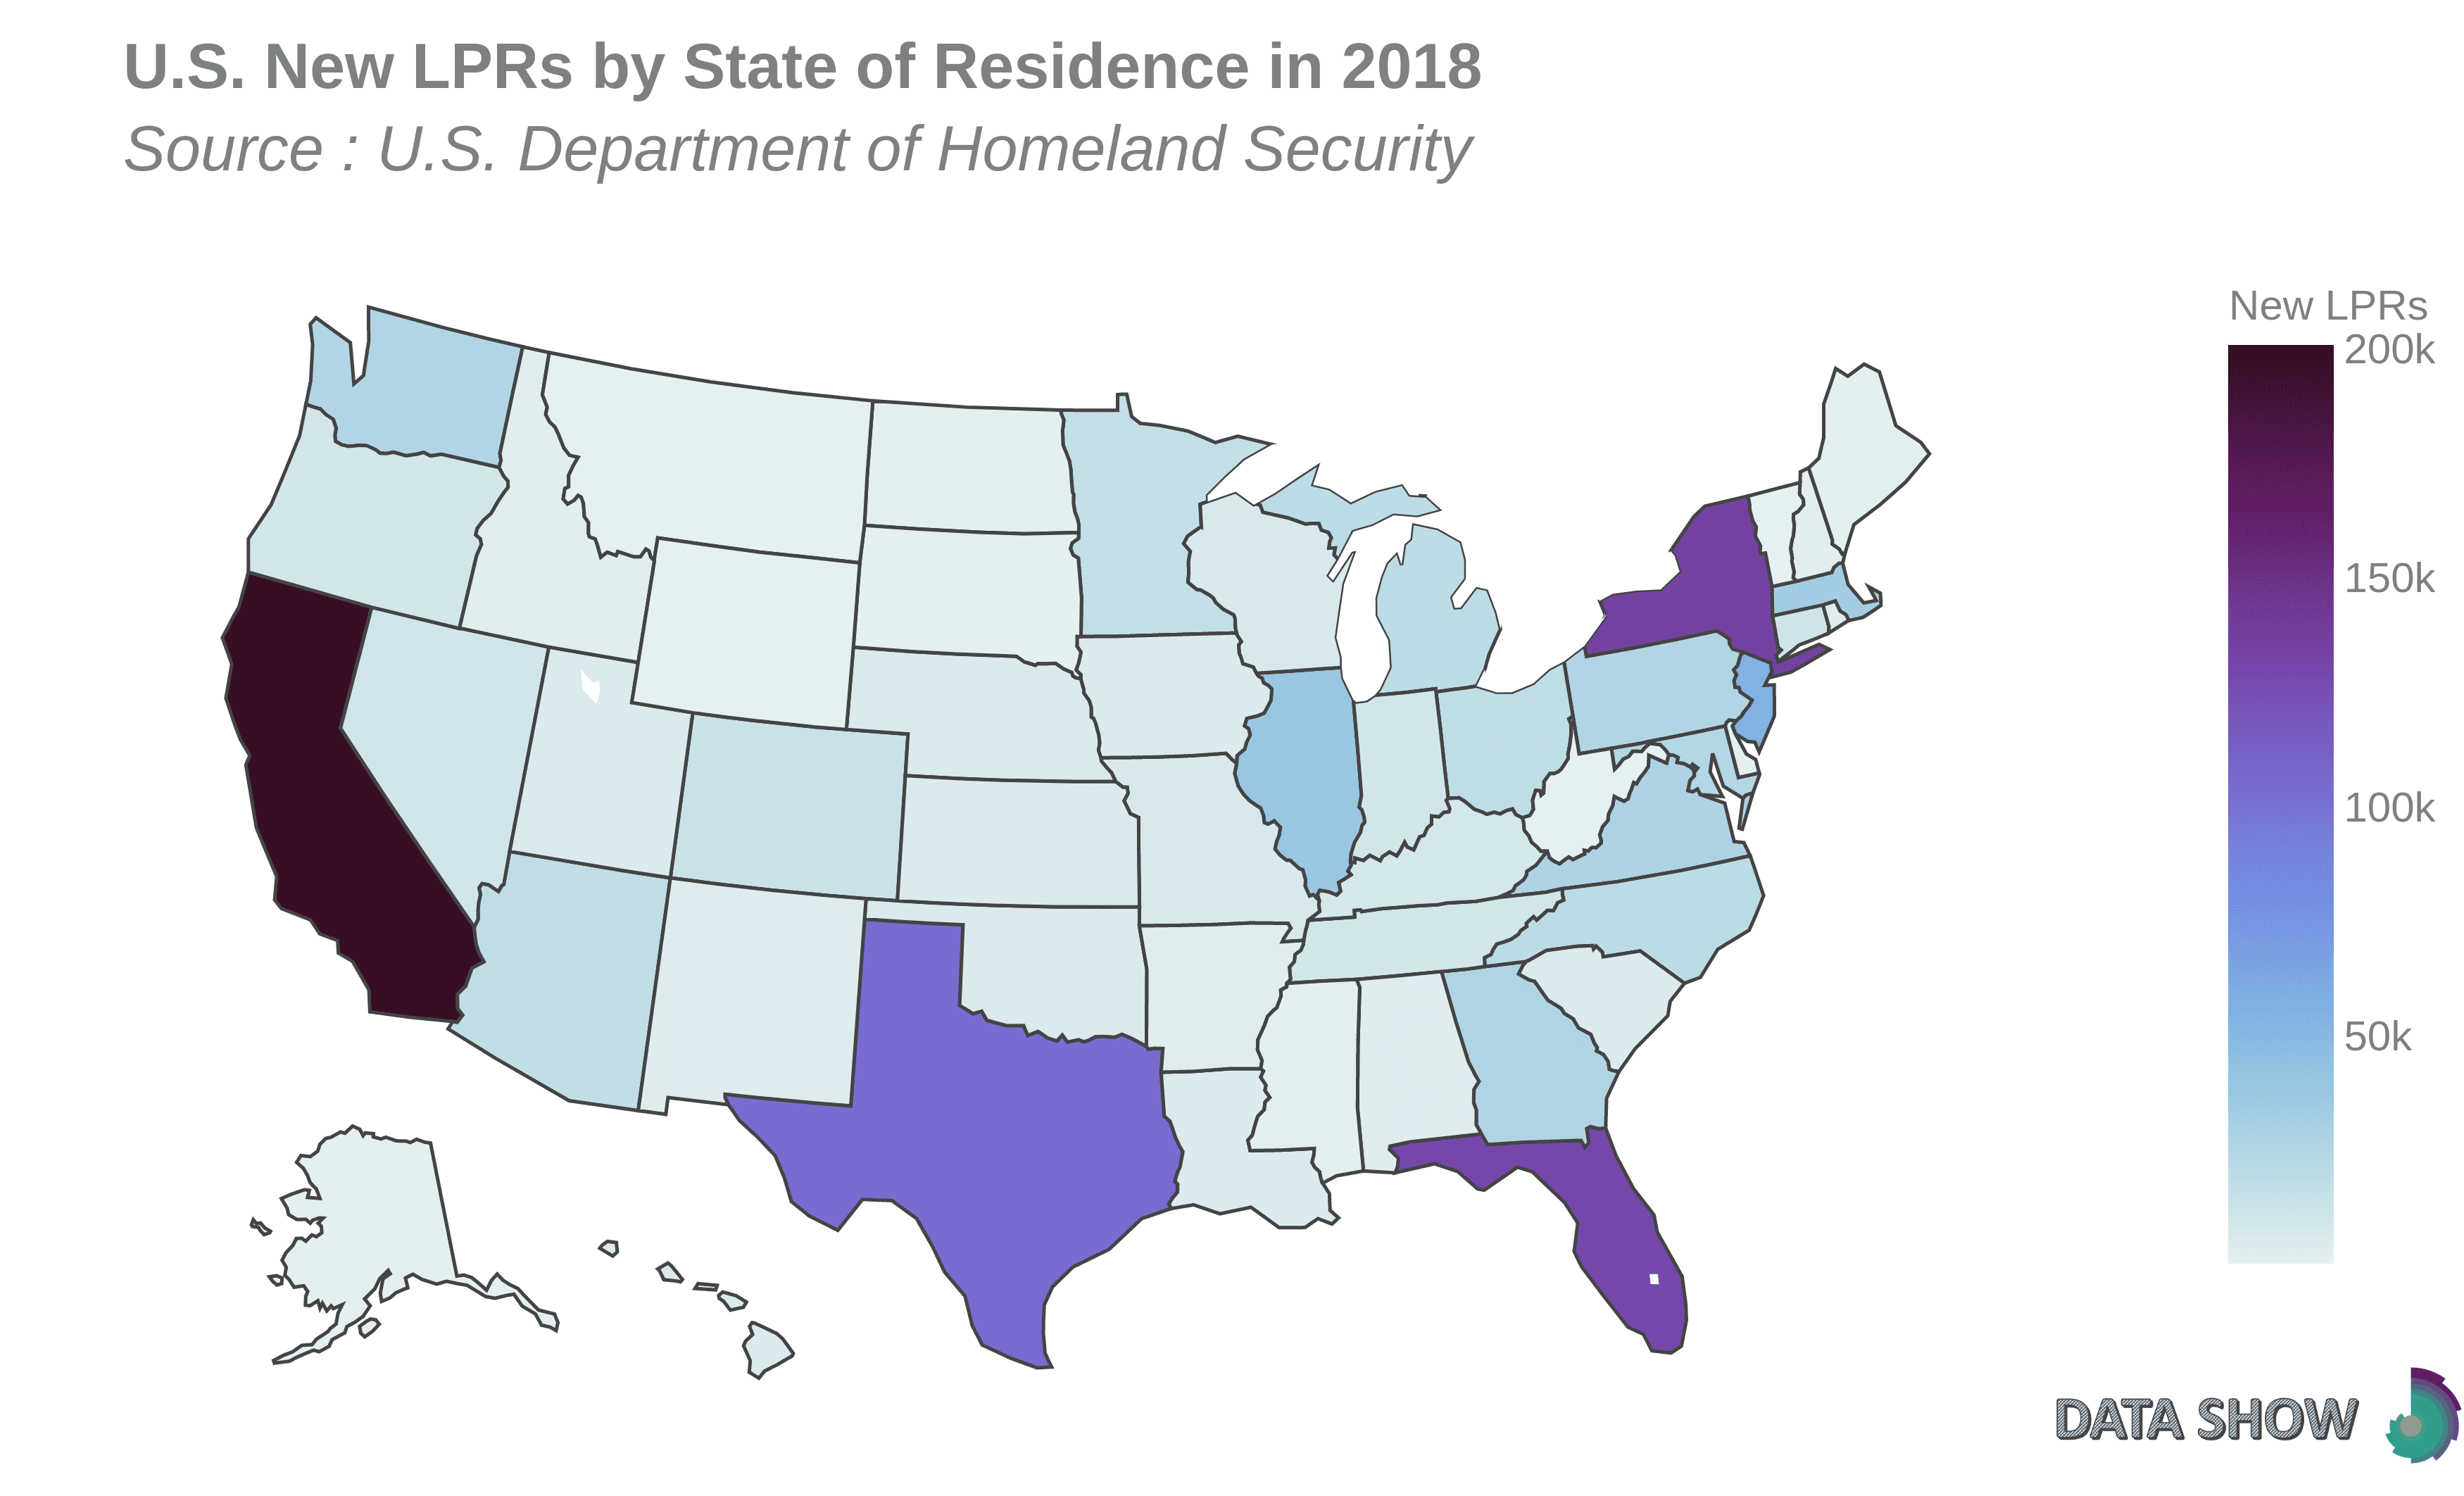 U.S. New Lawful Permanent Residents by State of Residence in 2018 - Map